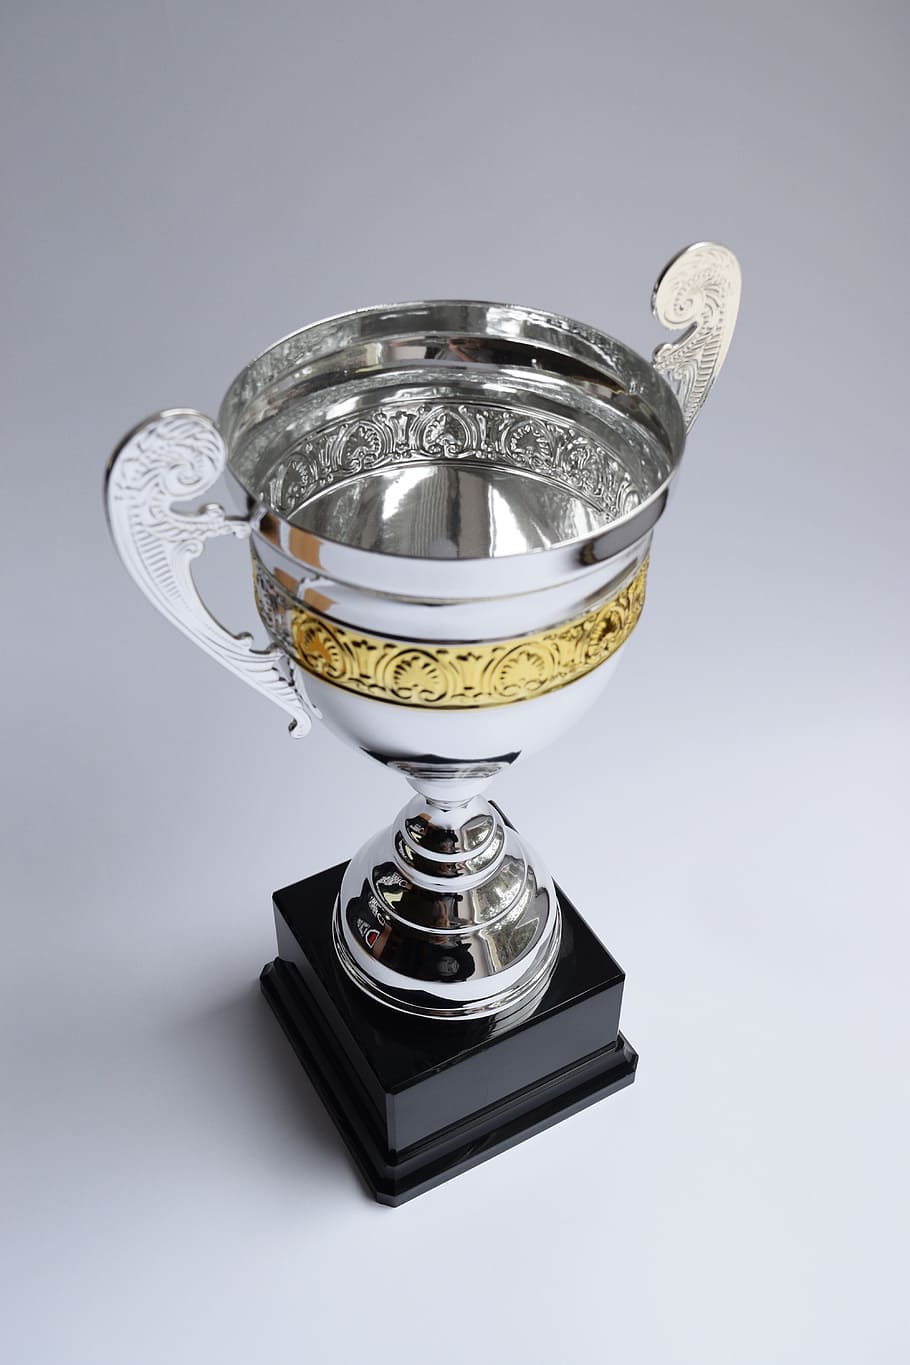 two-tone trophy, award, winner, prize, cup, victory, achievement